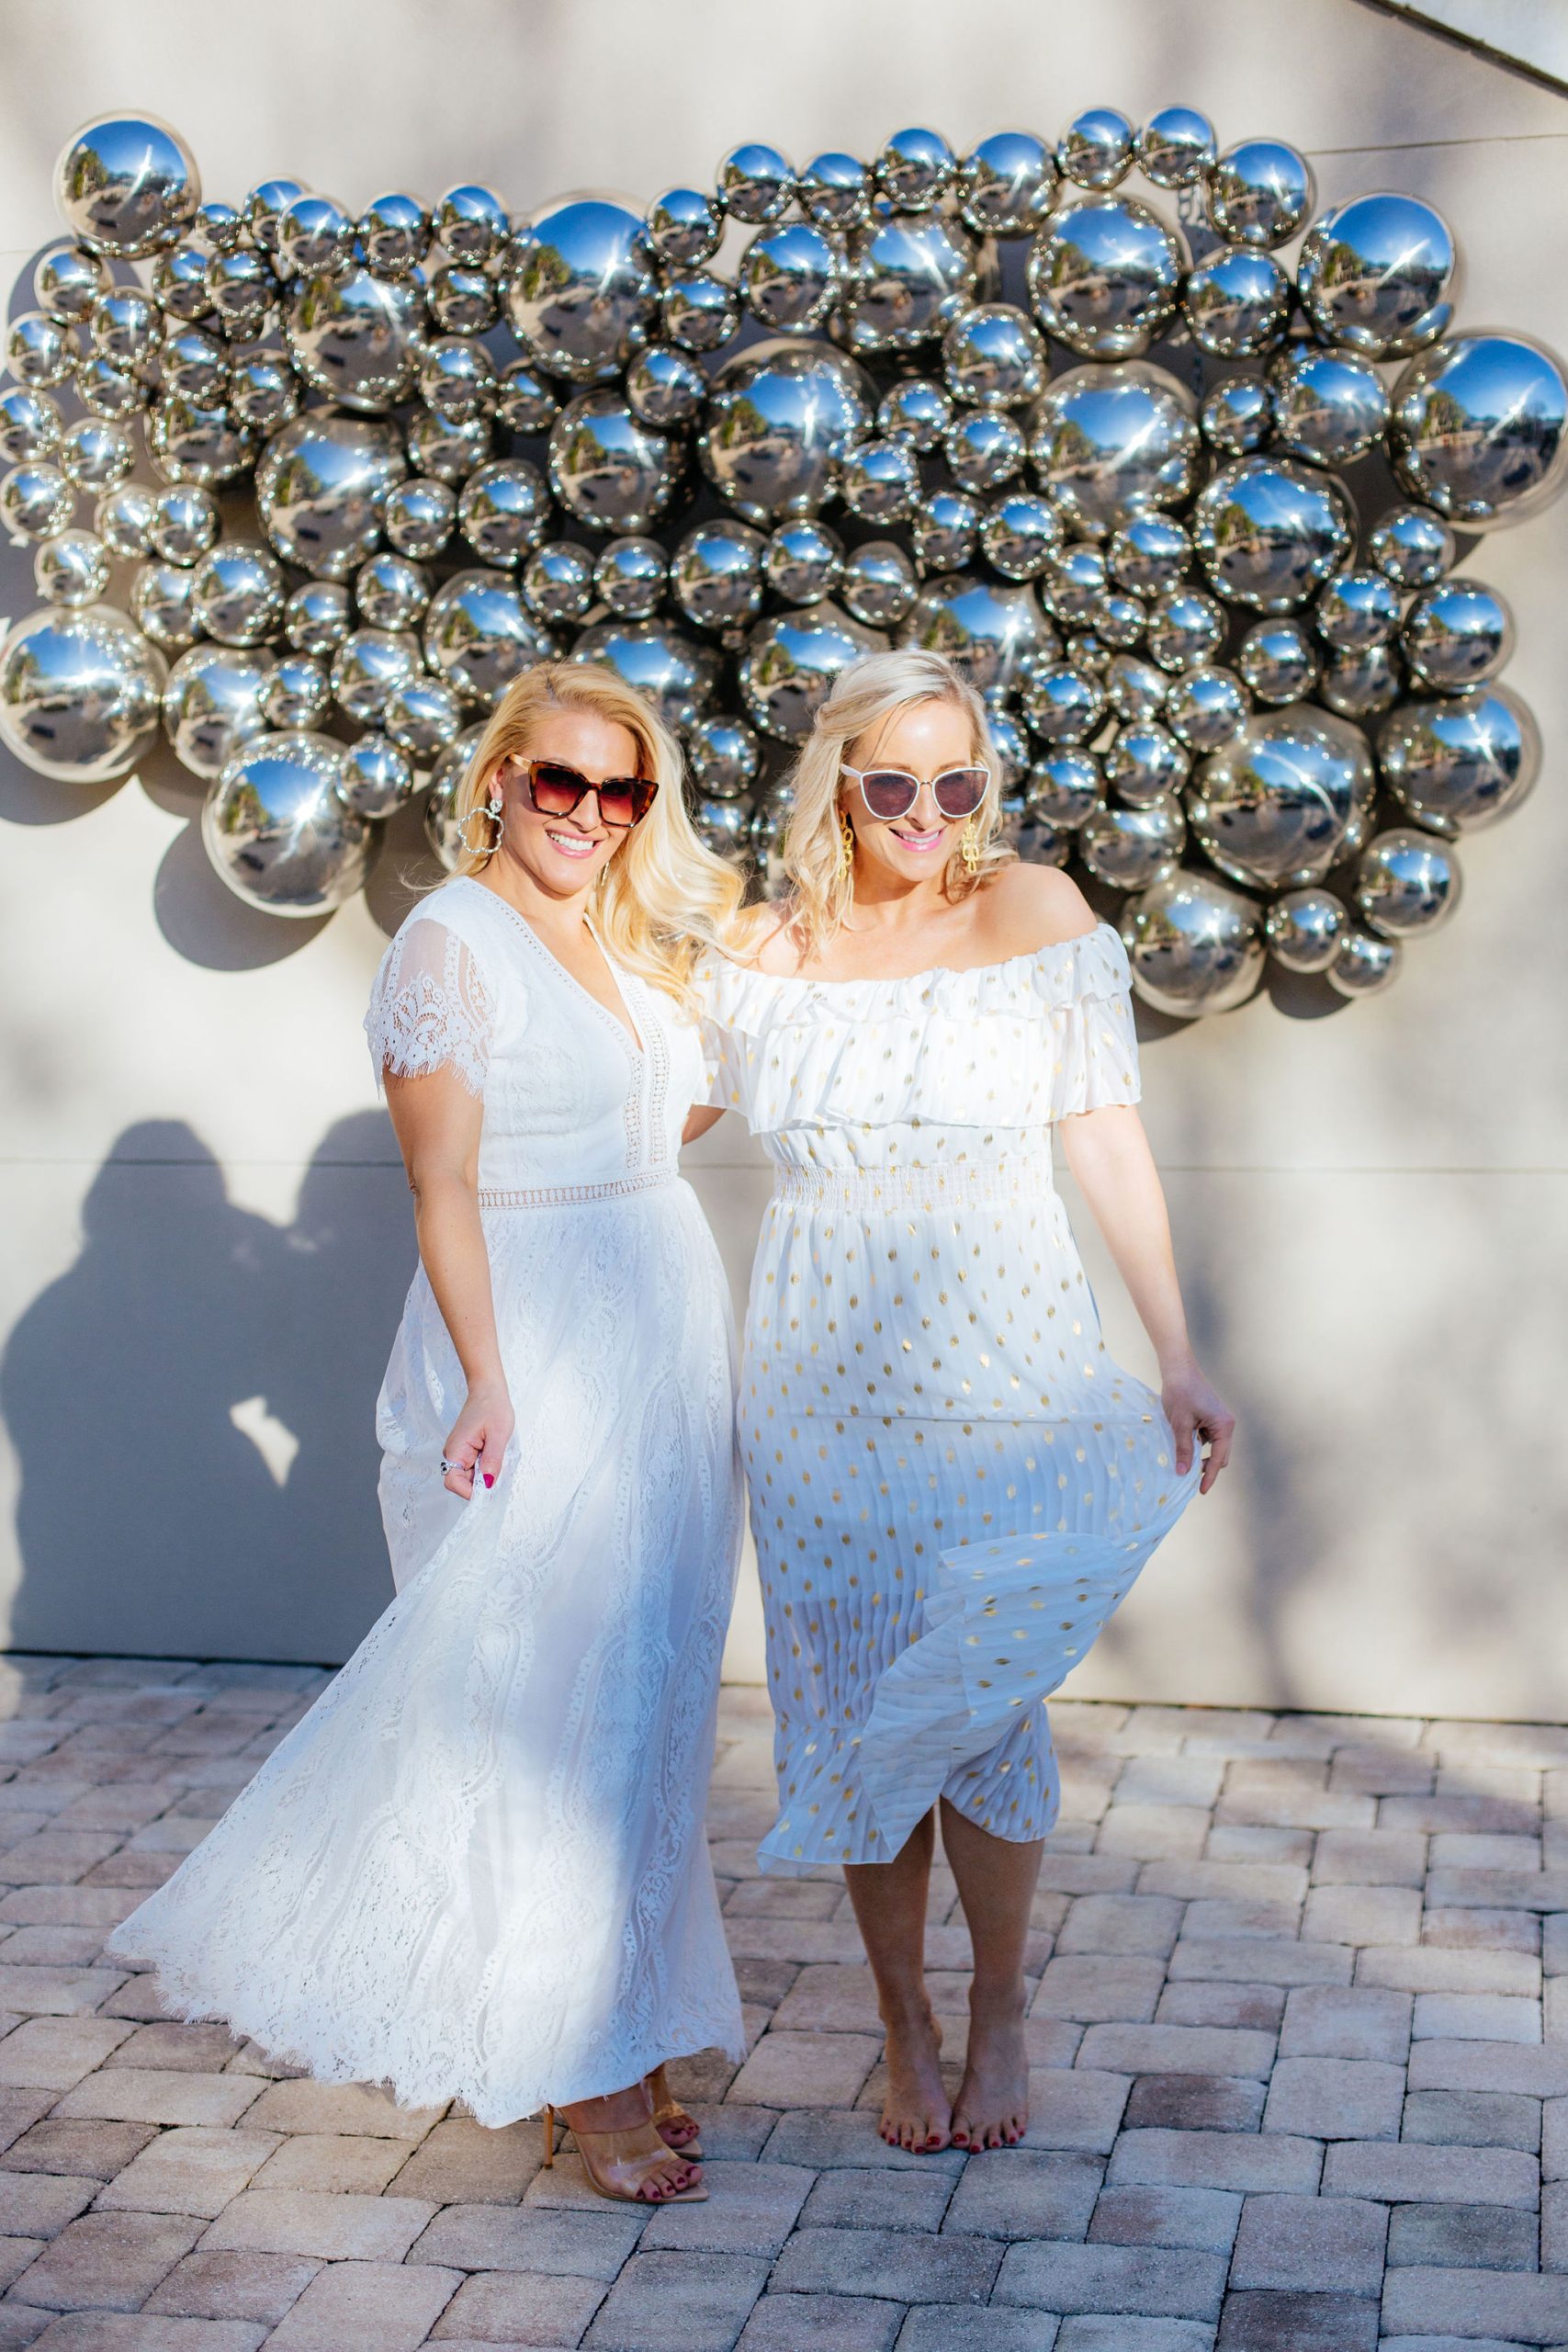 Style Blogger Jenn Truman @jtstjtst11 at the Epicurean Hotel, Autograph Collection poolside and in a bohemian white lace dress with clear heels and sunglasses on. She's also wearing silver bamboo Lisi Lerch earrings